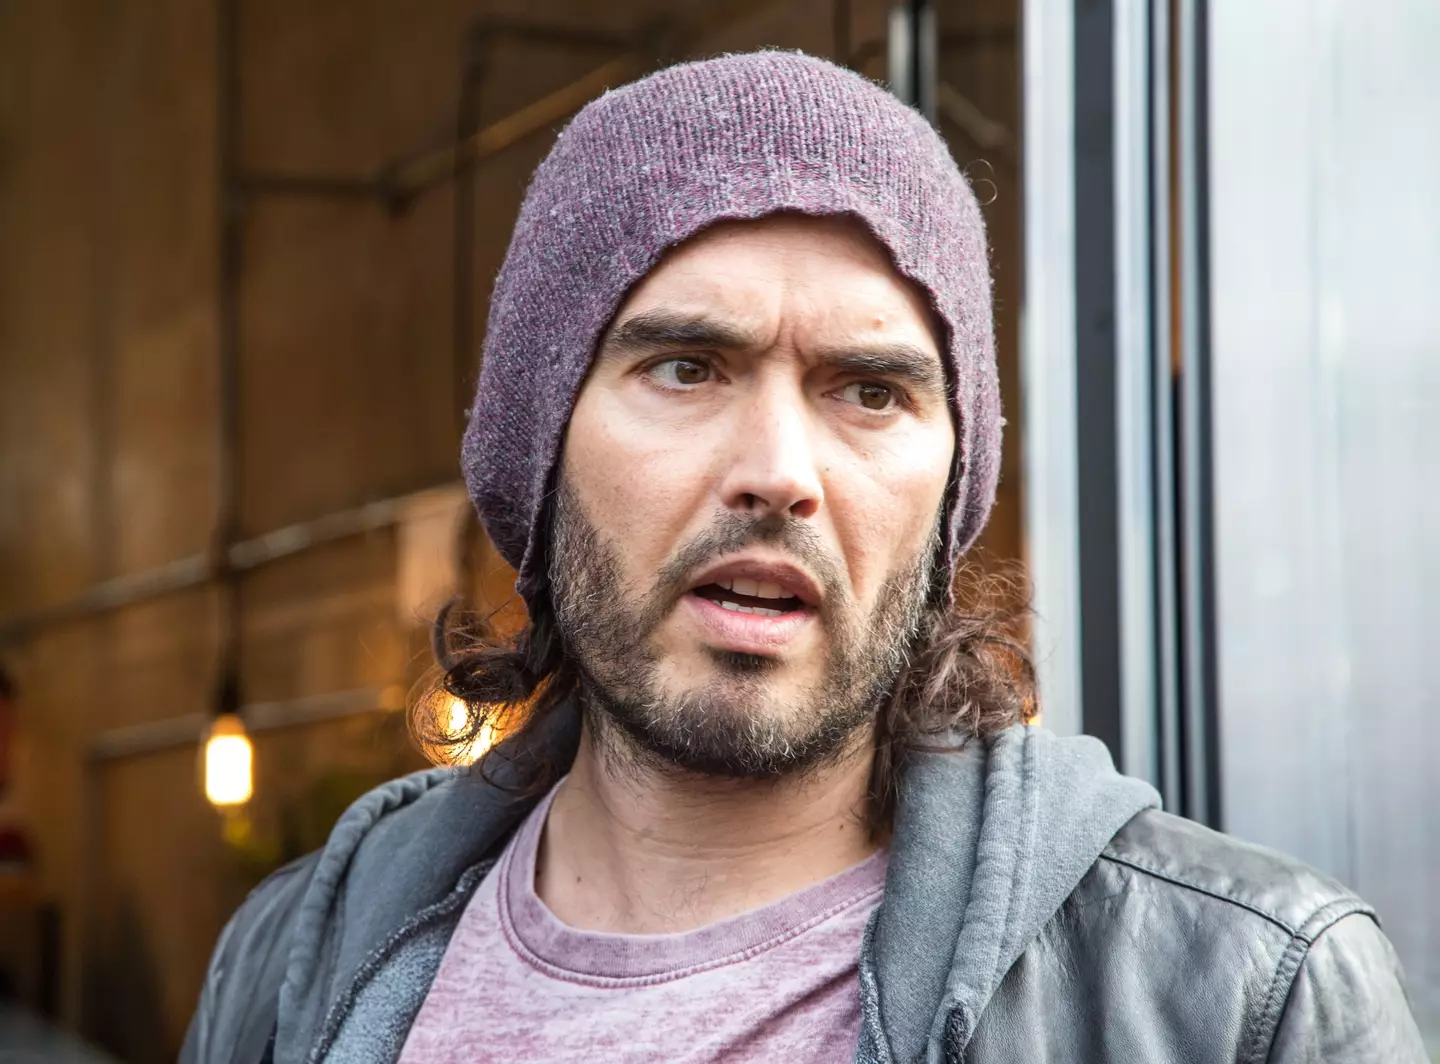 Resurfaced footage has revealed Russell Brand speaking out about why he was fired from MTV.